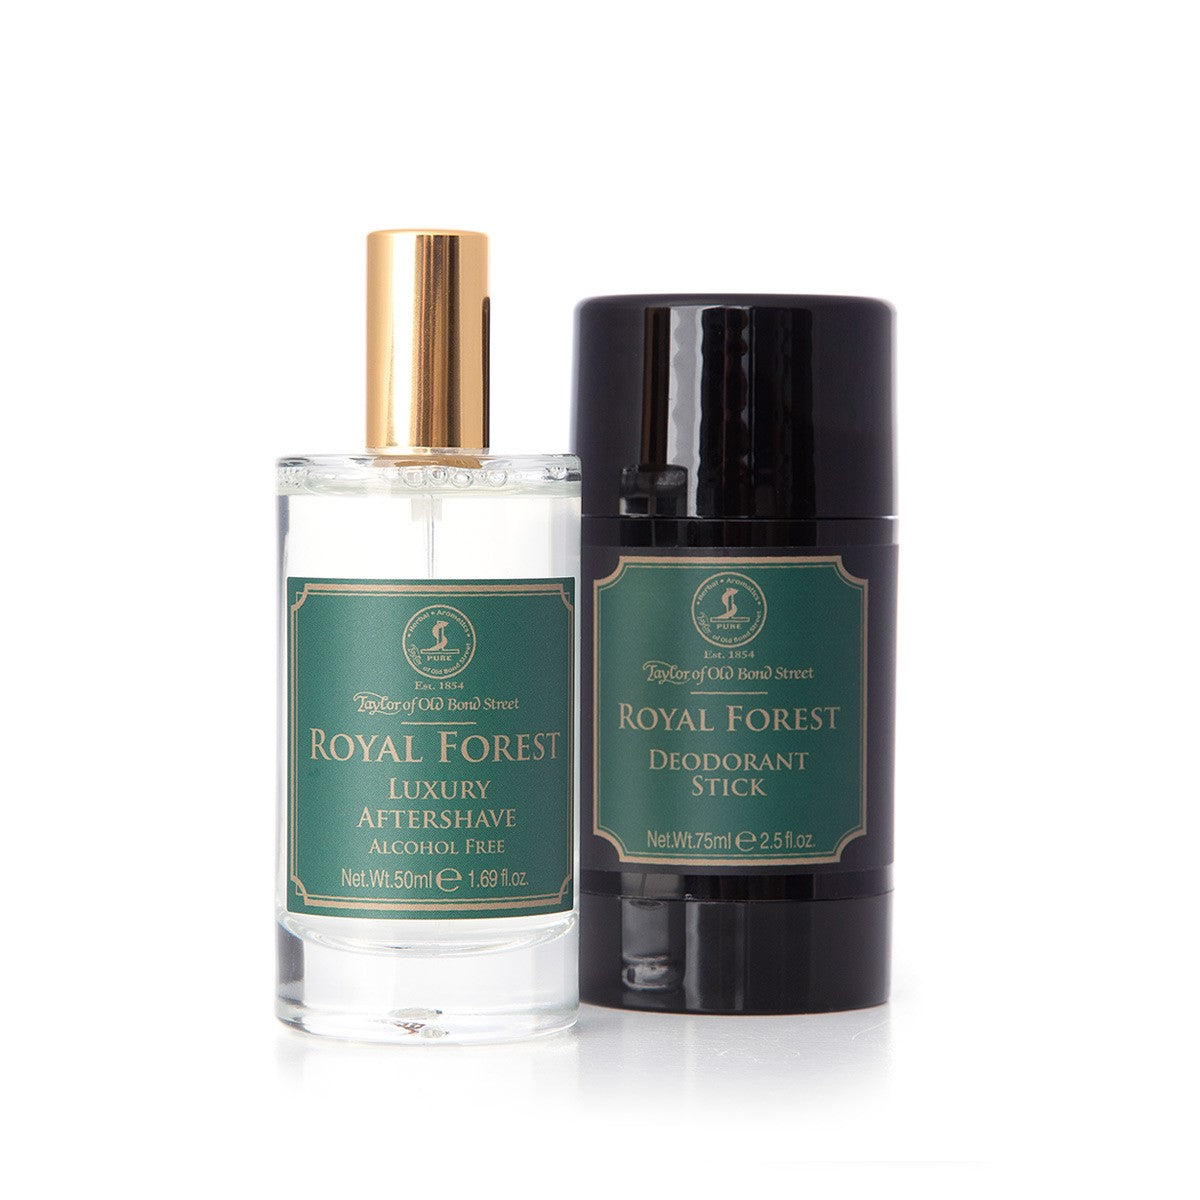 Royal Forest Aftershave and Deodorant Gift Set